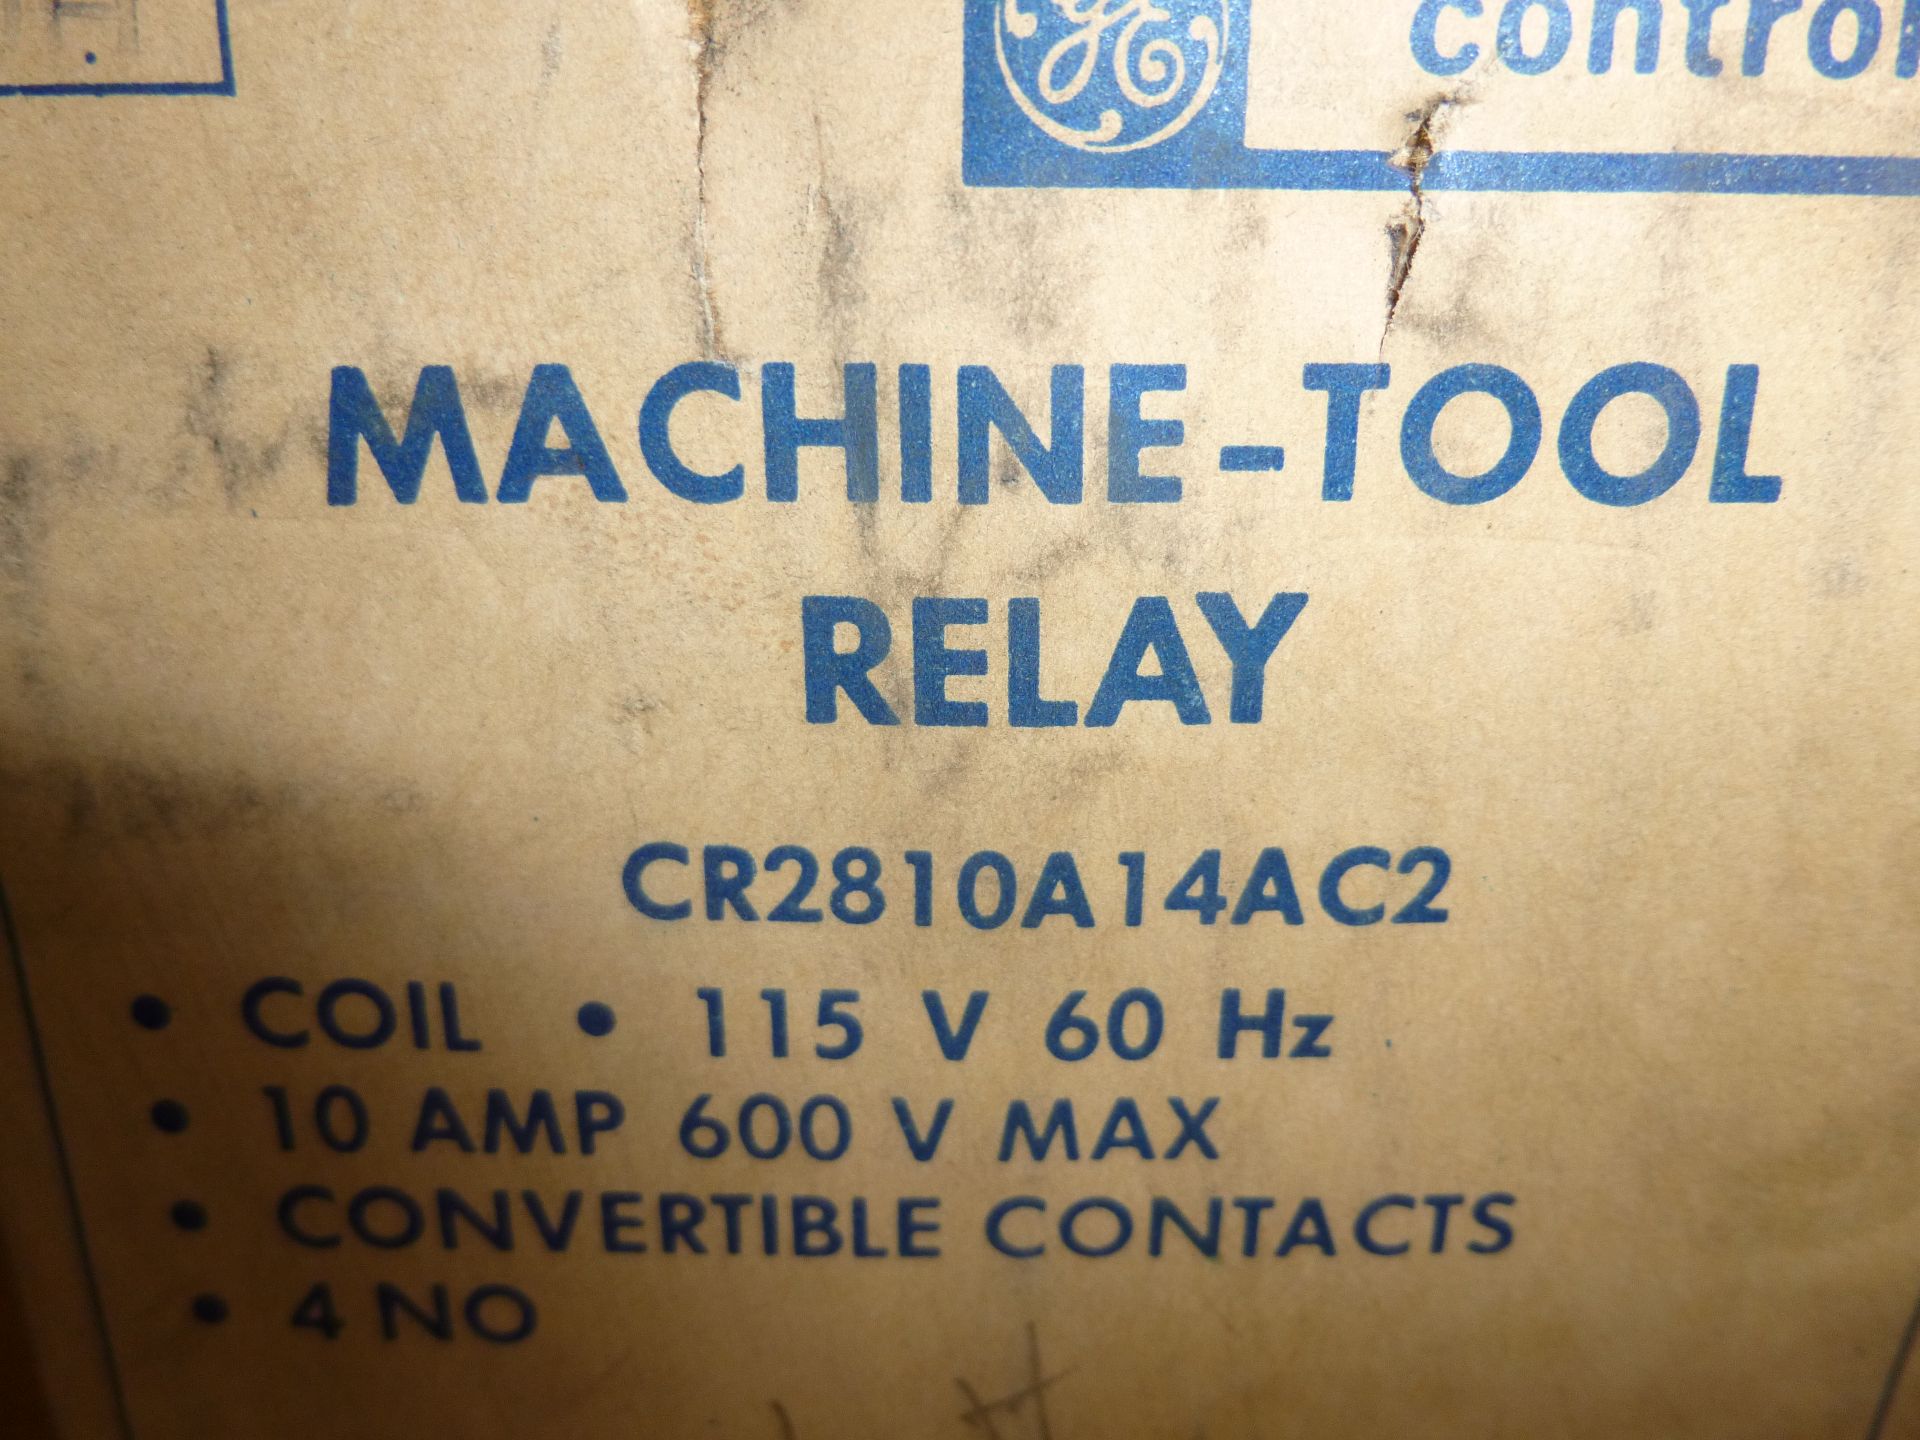 Qty 2 GE machine tool relays, part CR2810A14AA2, and part CR2810A14AC2, new in boxes, as always with - Image 3 of 3